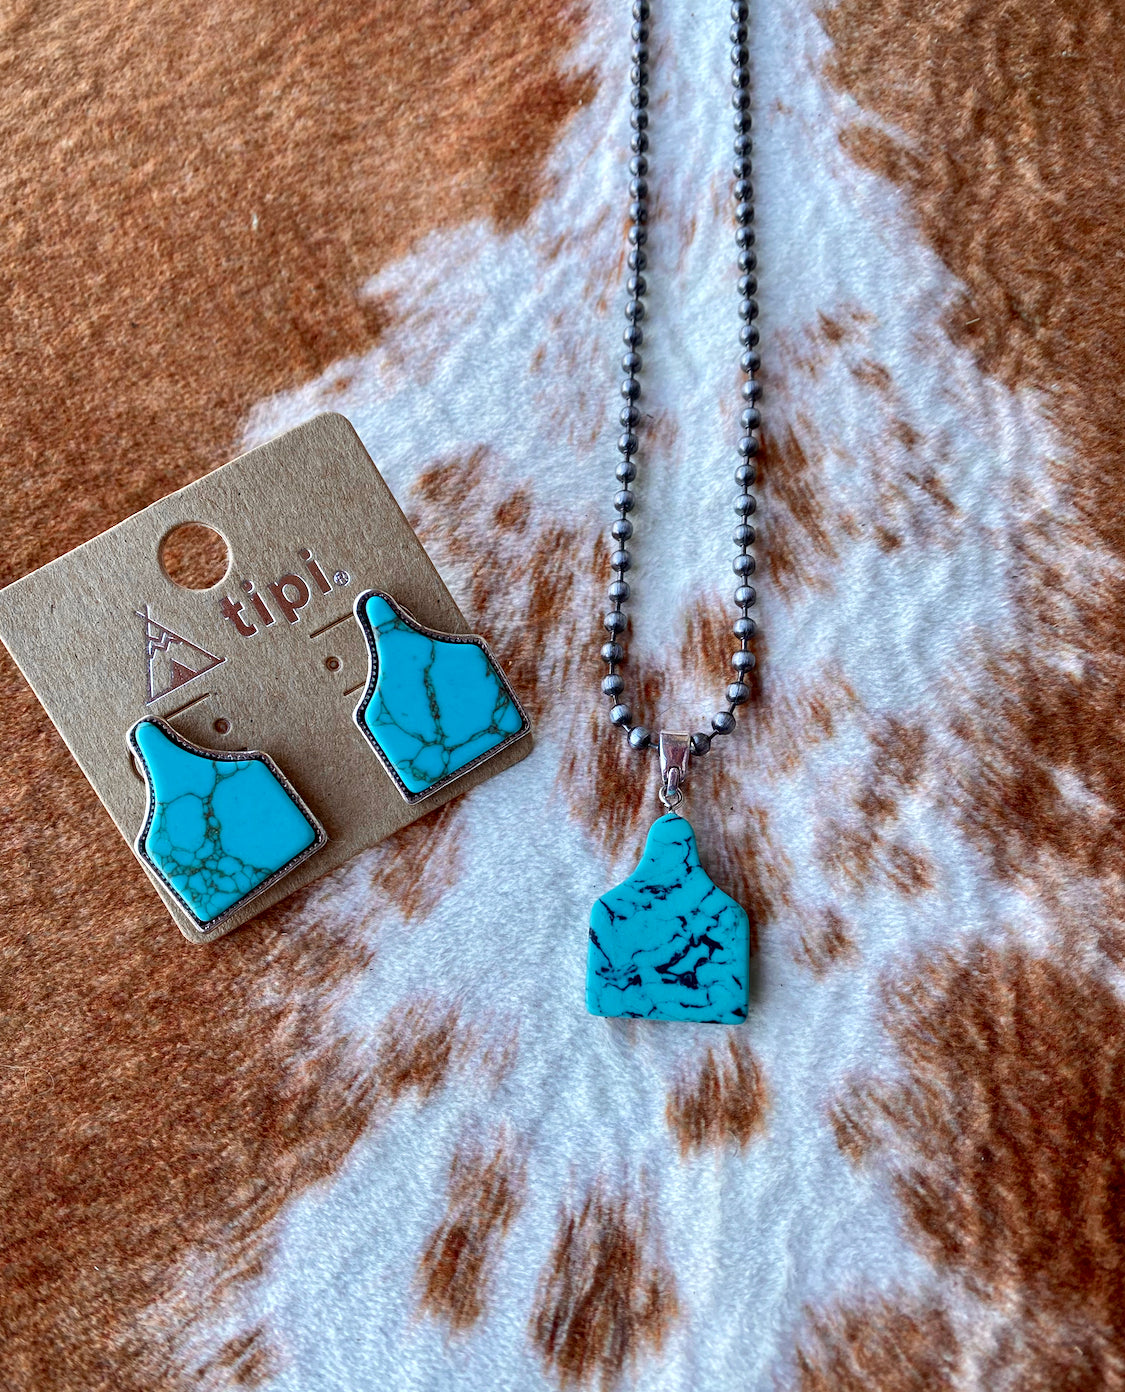 Design your own ear tag jewellery– cornishbluebelle